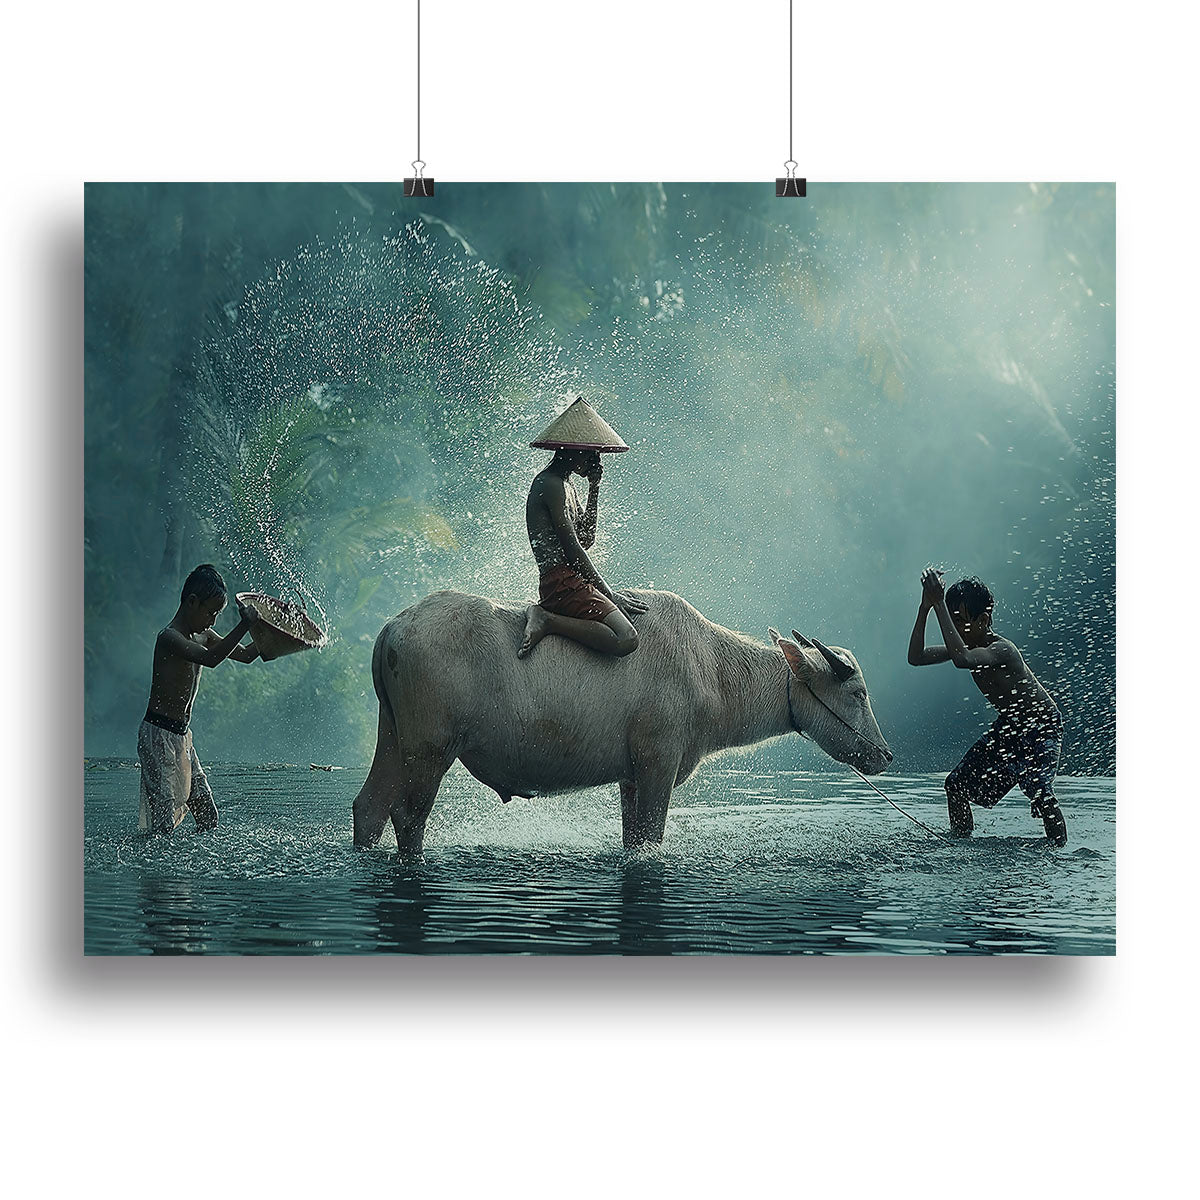 Water Buffalo Canvas Print or Poster - 1x - 2